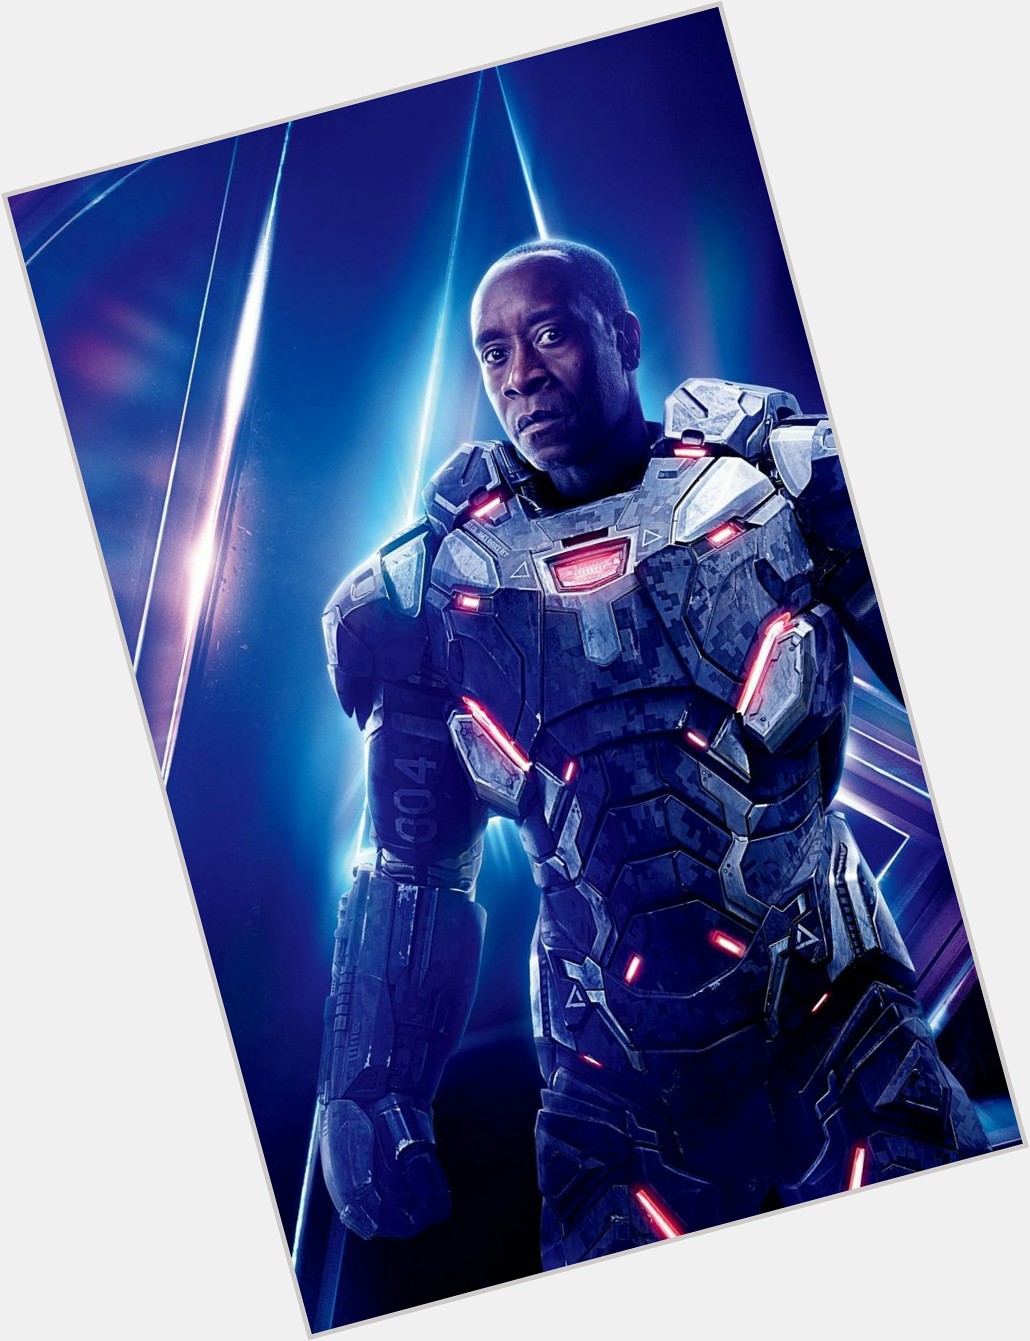 Happy Birthday Don Cheadle!
We really want an War Machine series though..  